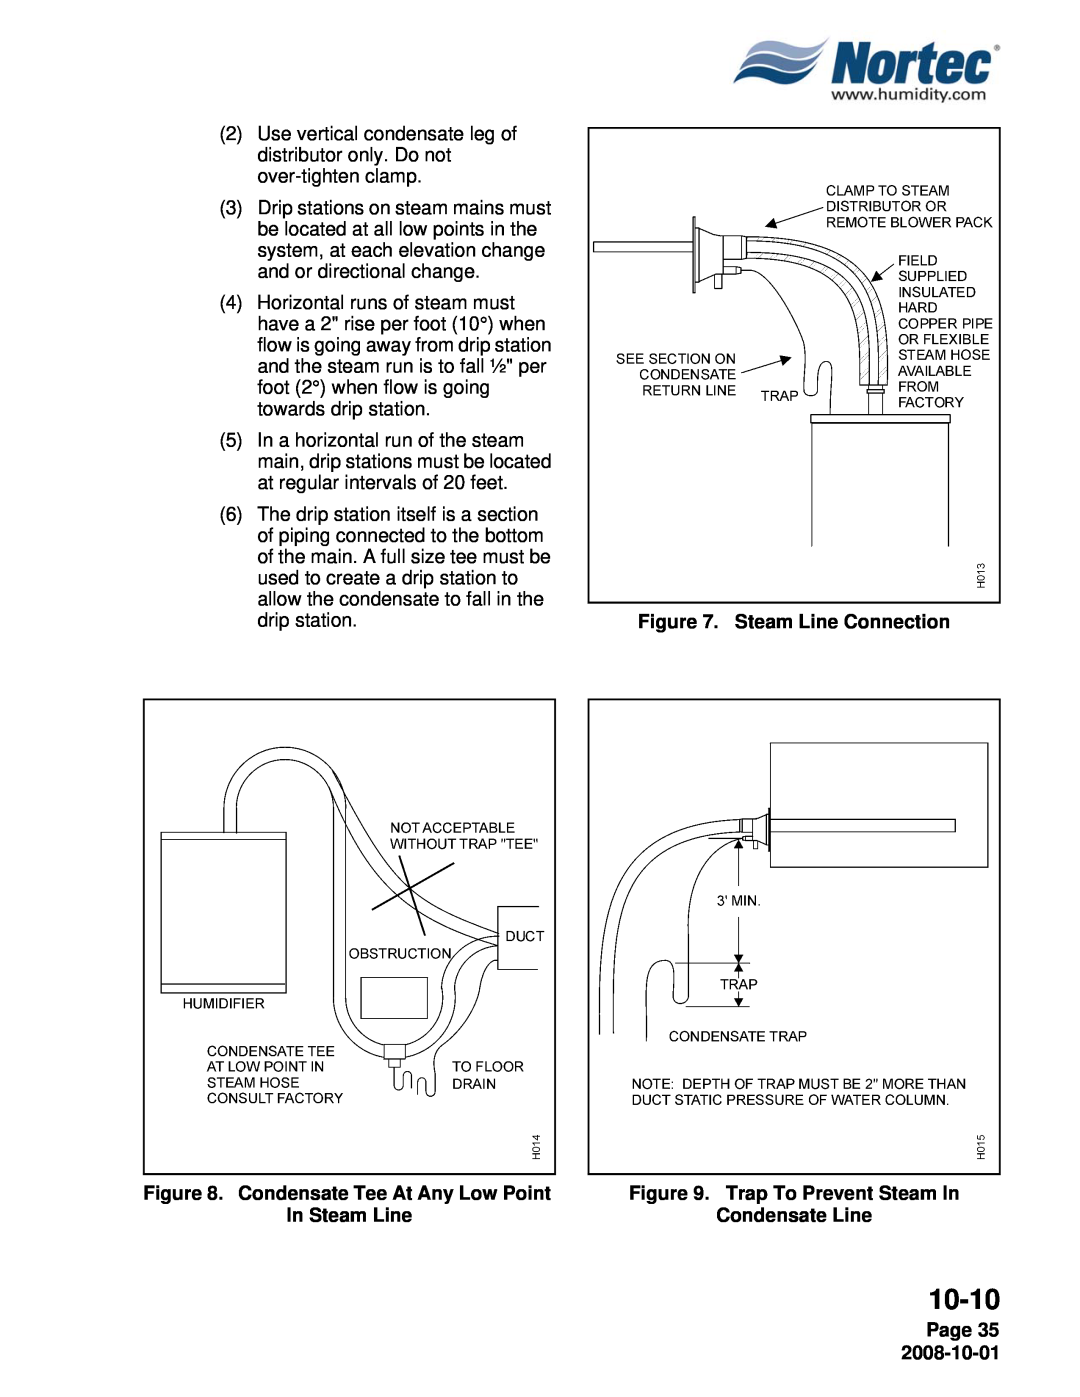 Nortec NHTC, NHPC 10-10, Condensate Tee At Any Low Point, In Steam Line, Steam Line Connection, Trap To Prevent Steam In 